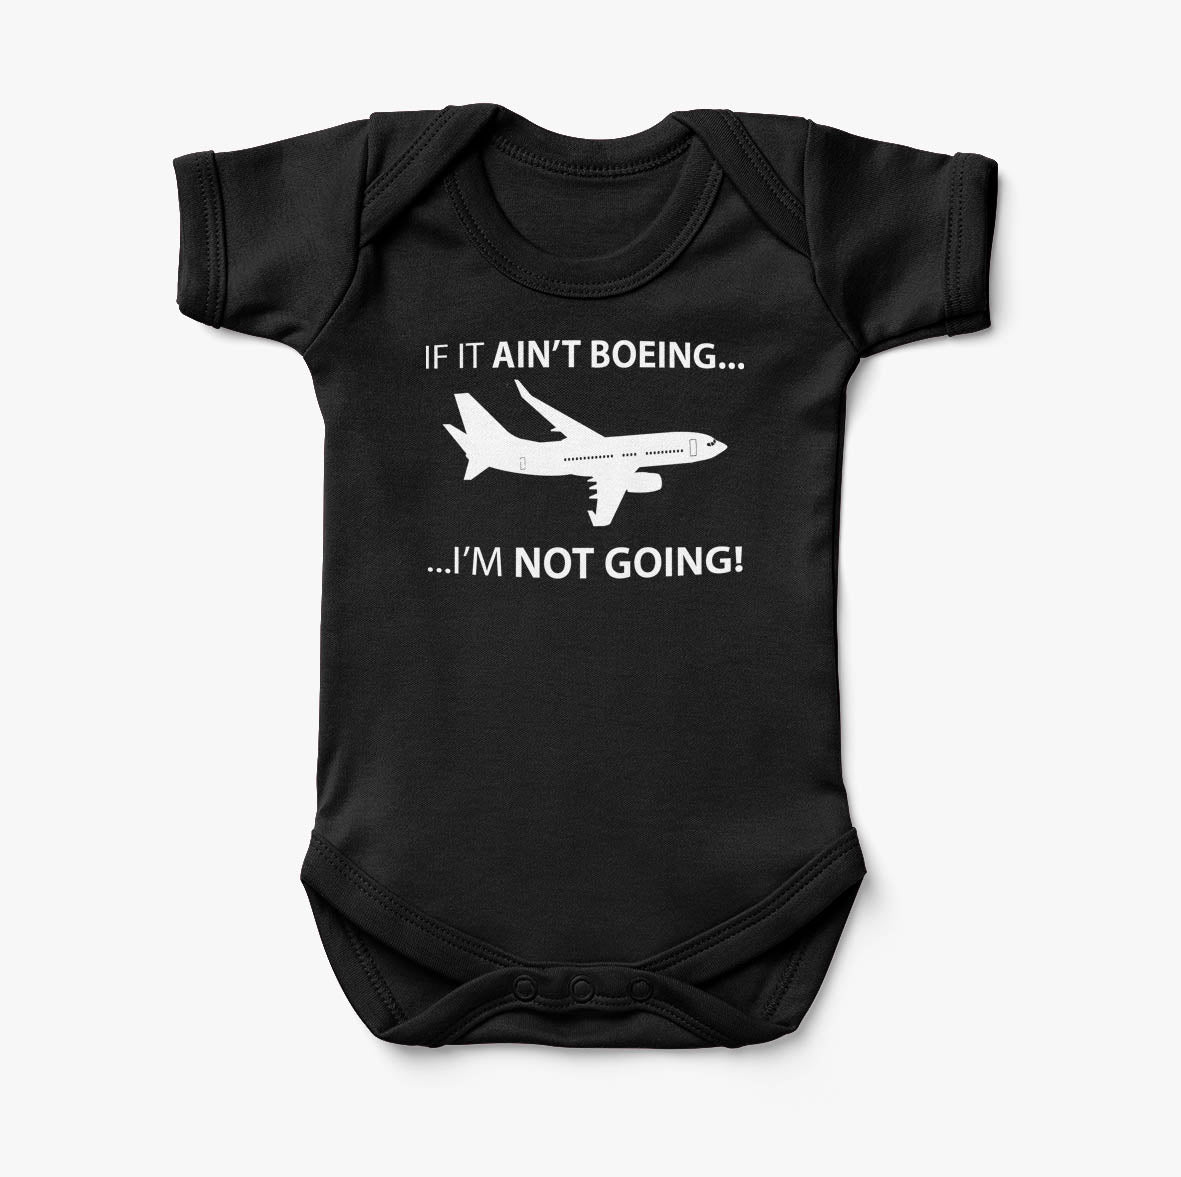 If It Ain't Boeing I'm Not Going! Designed Baby Bodysuits